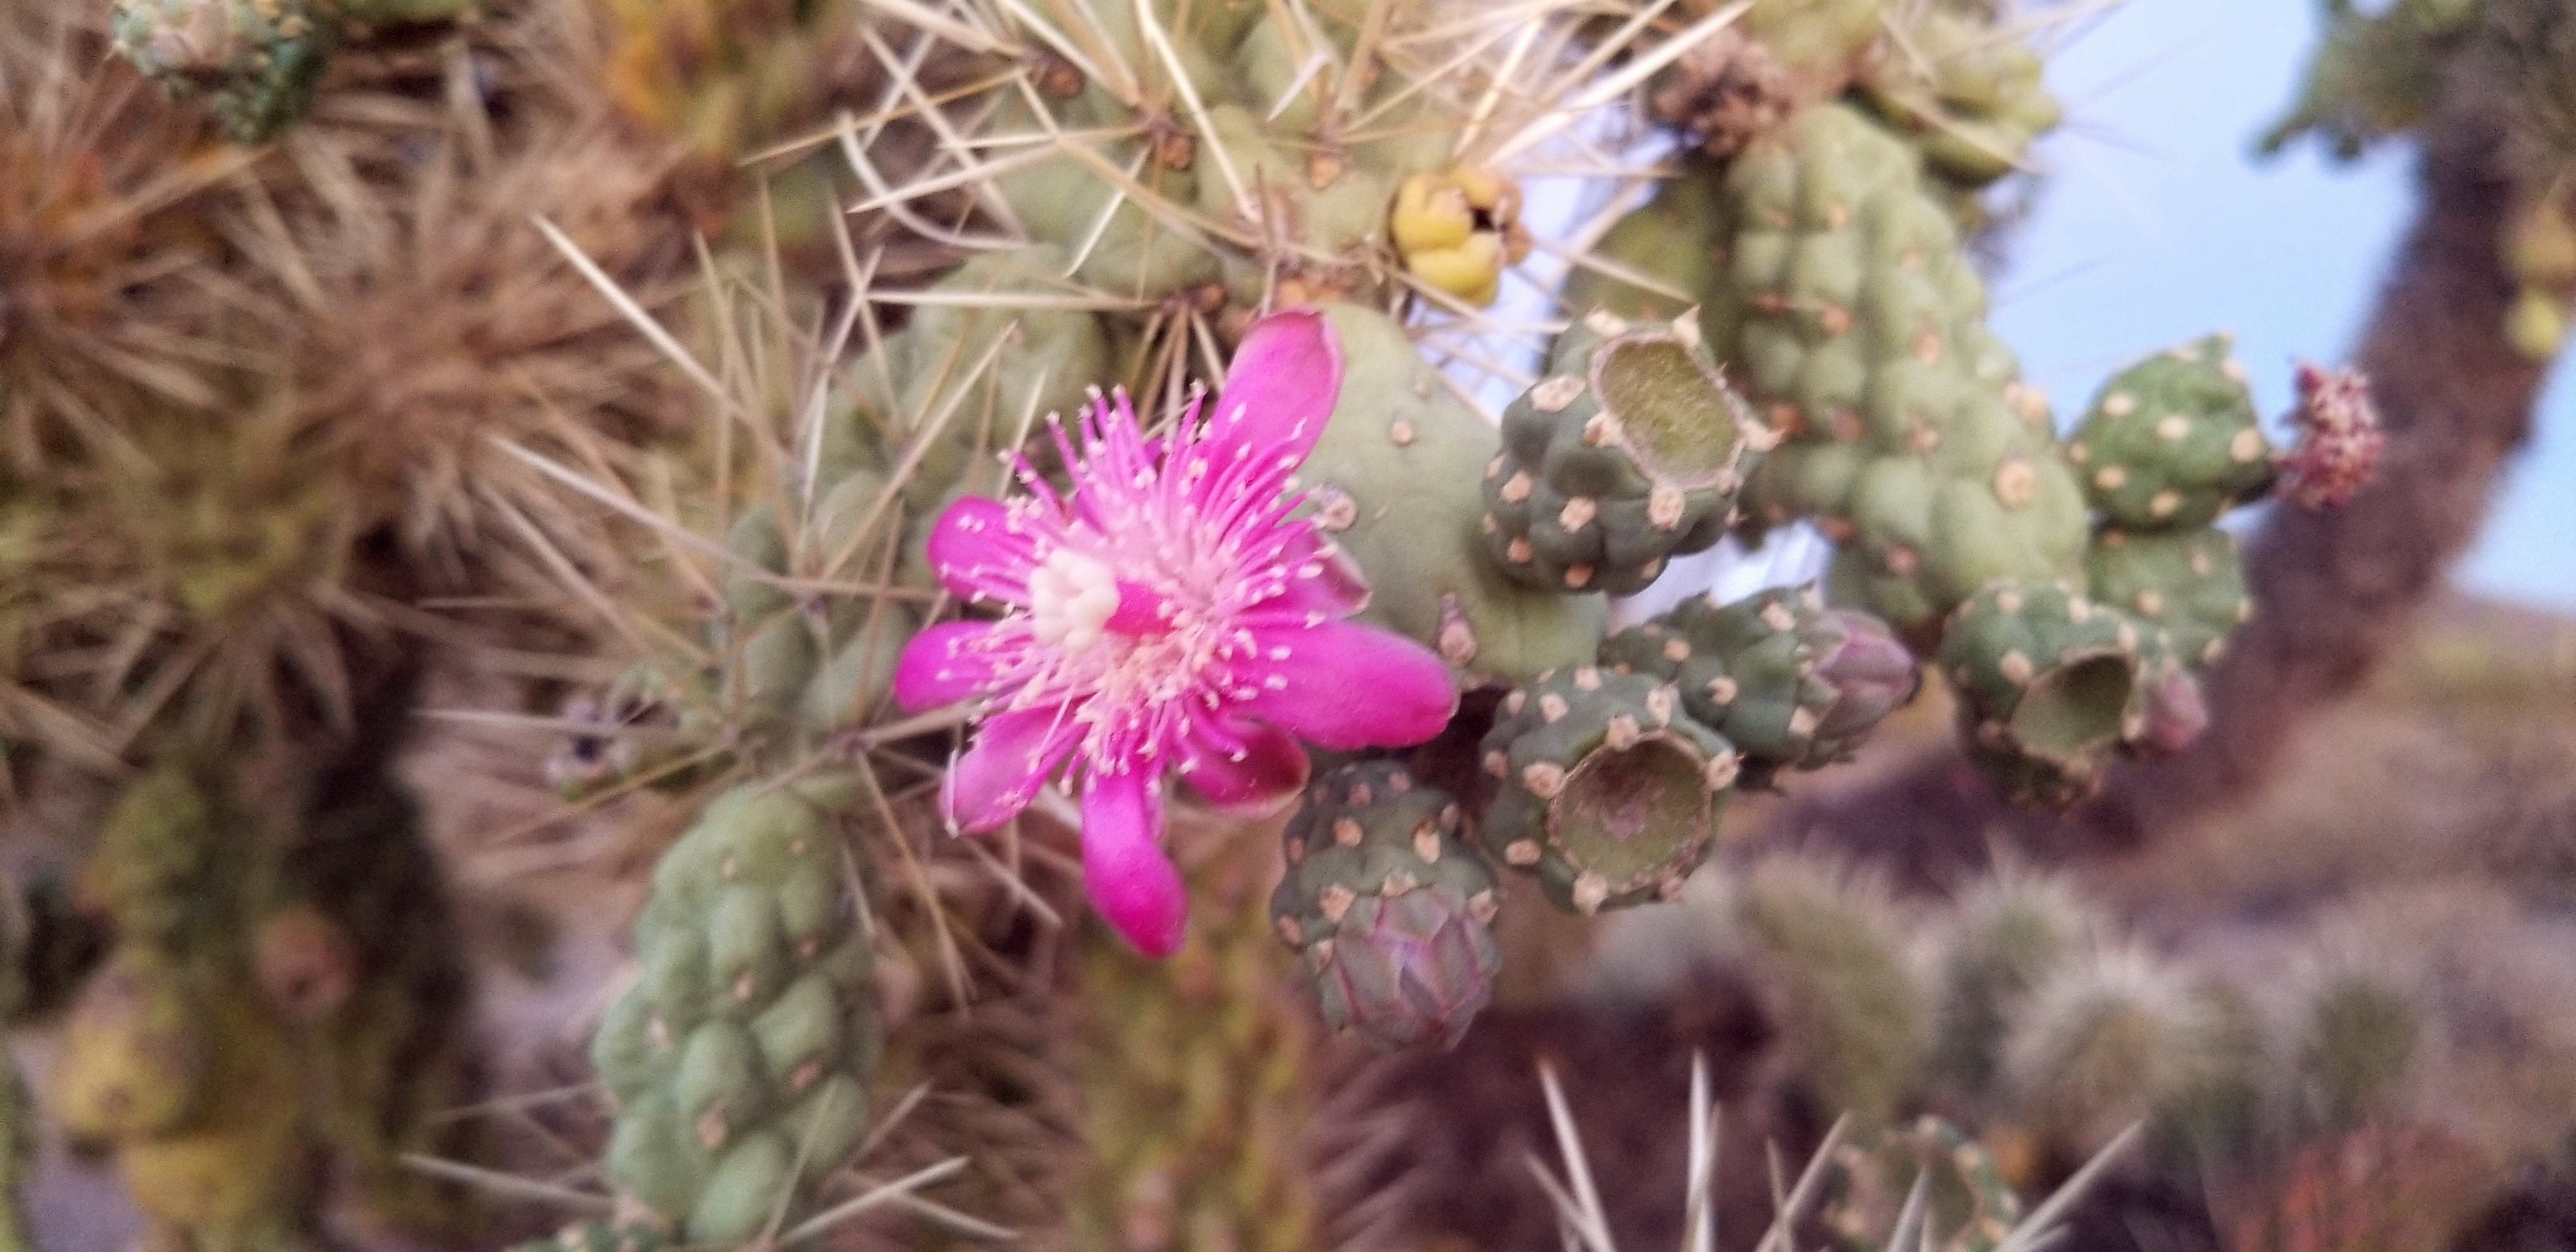 The amazing flower of the Teddy Bear Cactus.